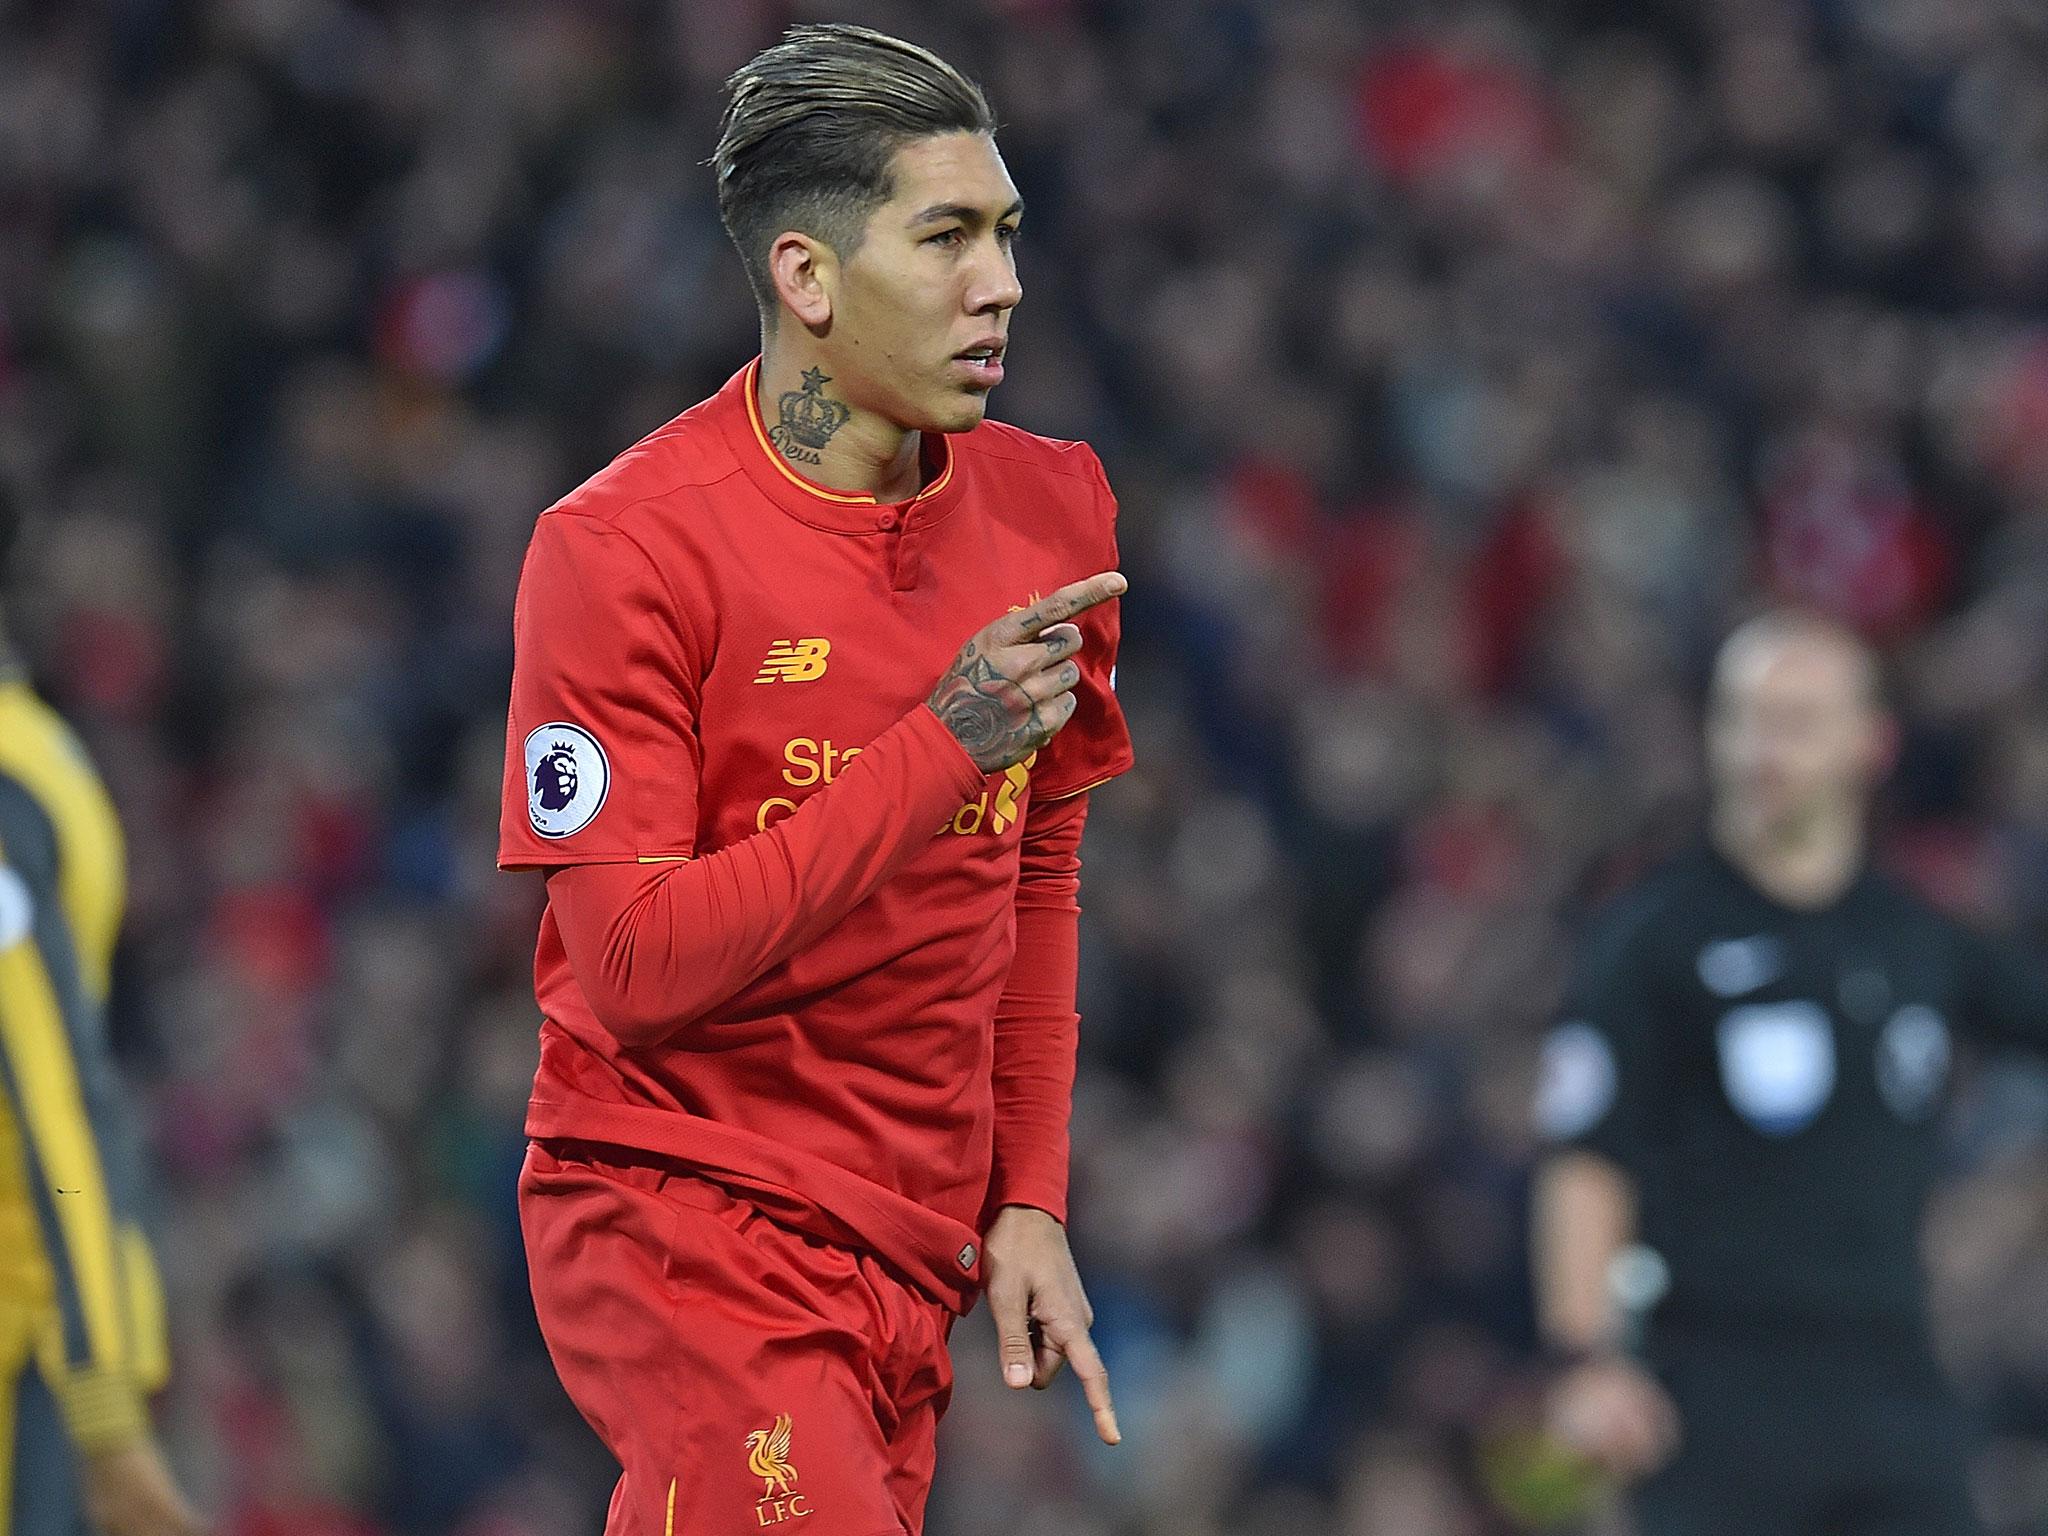 Roberto Firmino celebrates after scoring Liverpool's opening goal against Arsenal